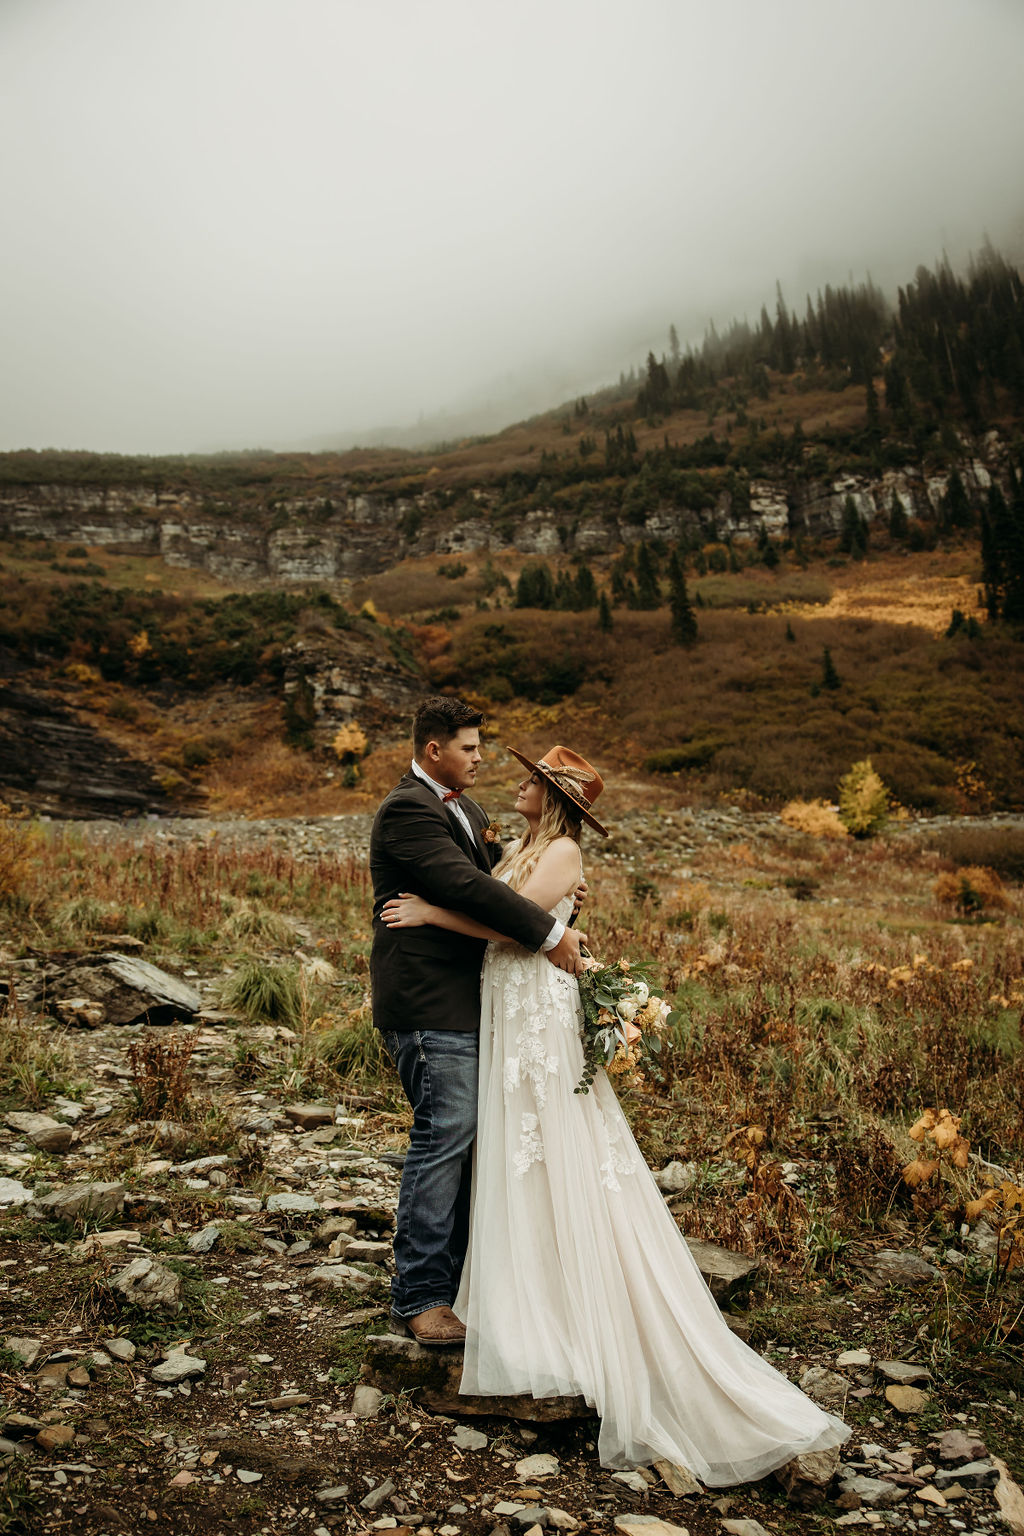 A couple, dressed in wedding attire, embrace and kiss on a rocky outcrop with a mountainous landscape in the background. The sky is overcast and the scene is surrounded by autumnal trees.